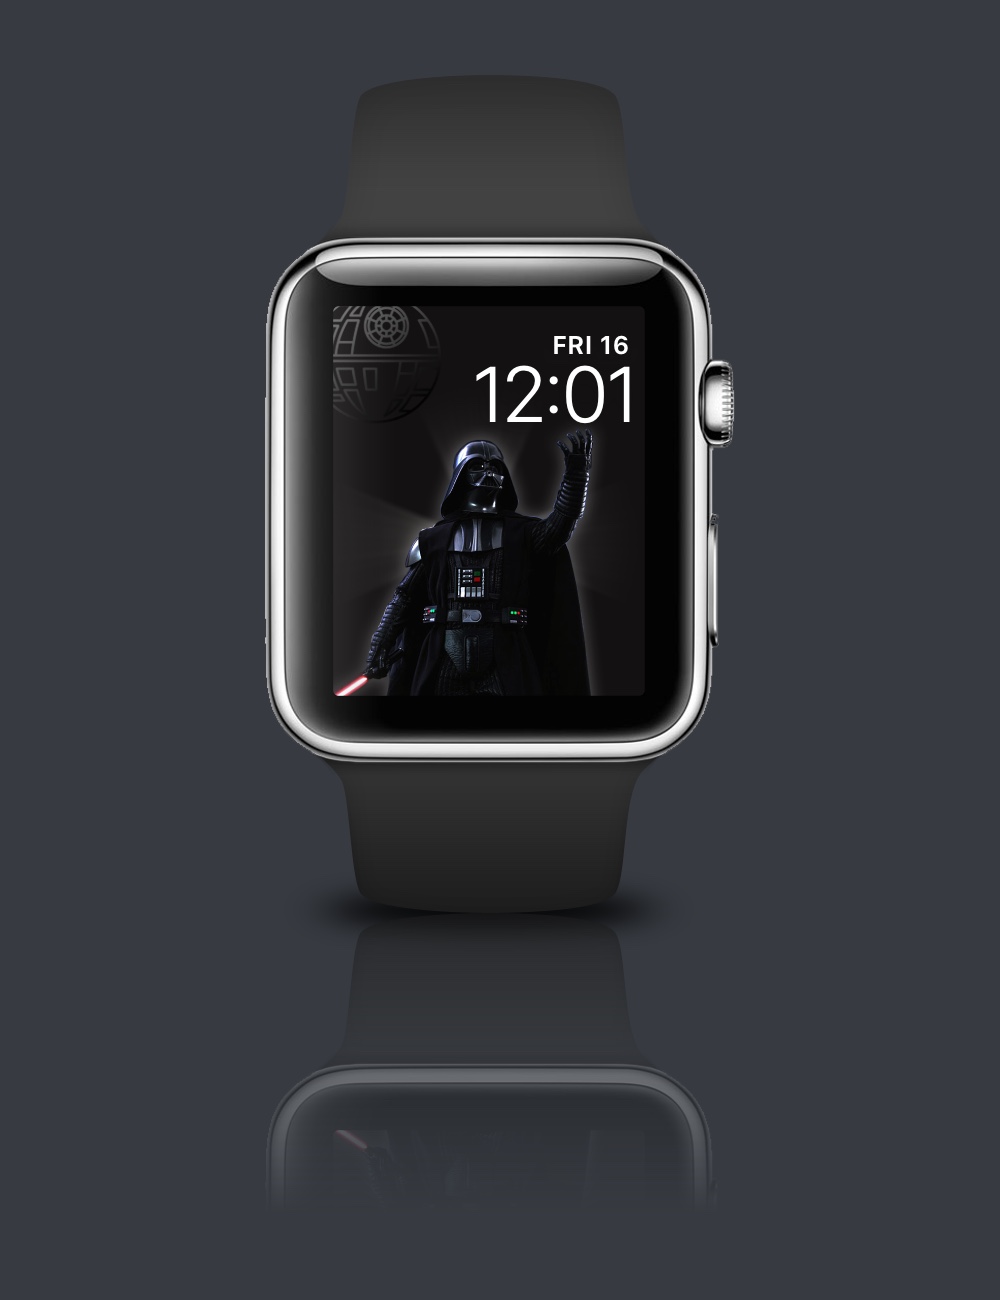 Post custom watch faces for Apple Watch [Merged], Page 40